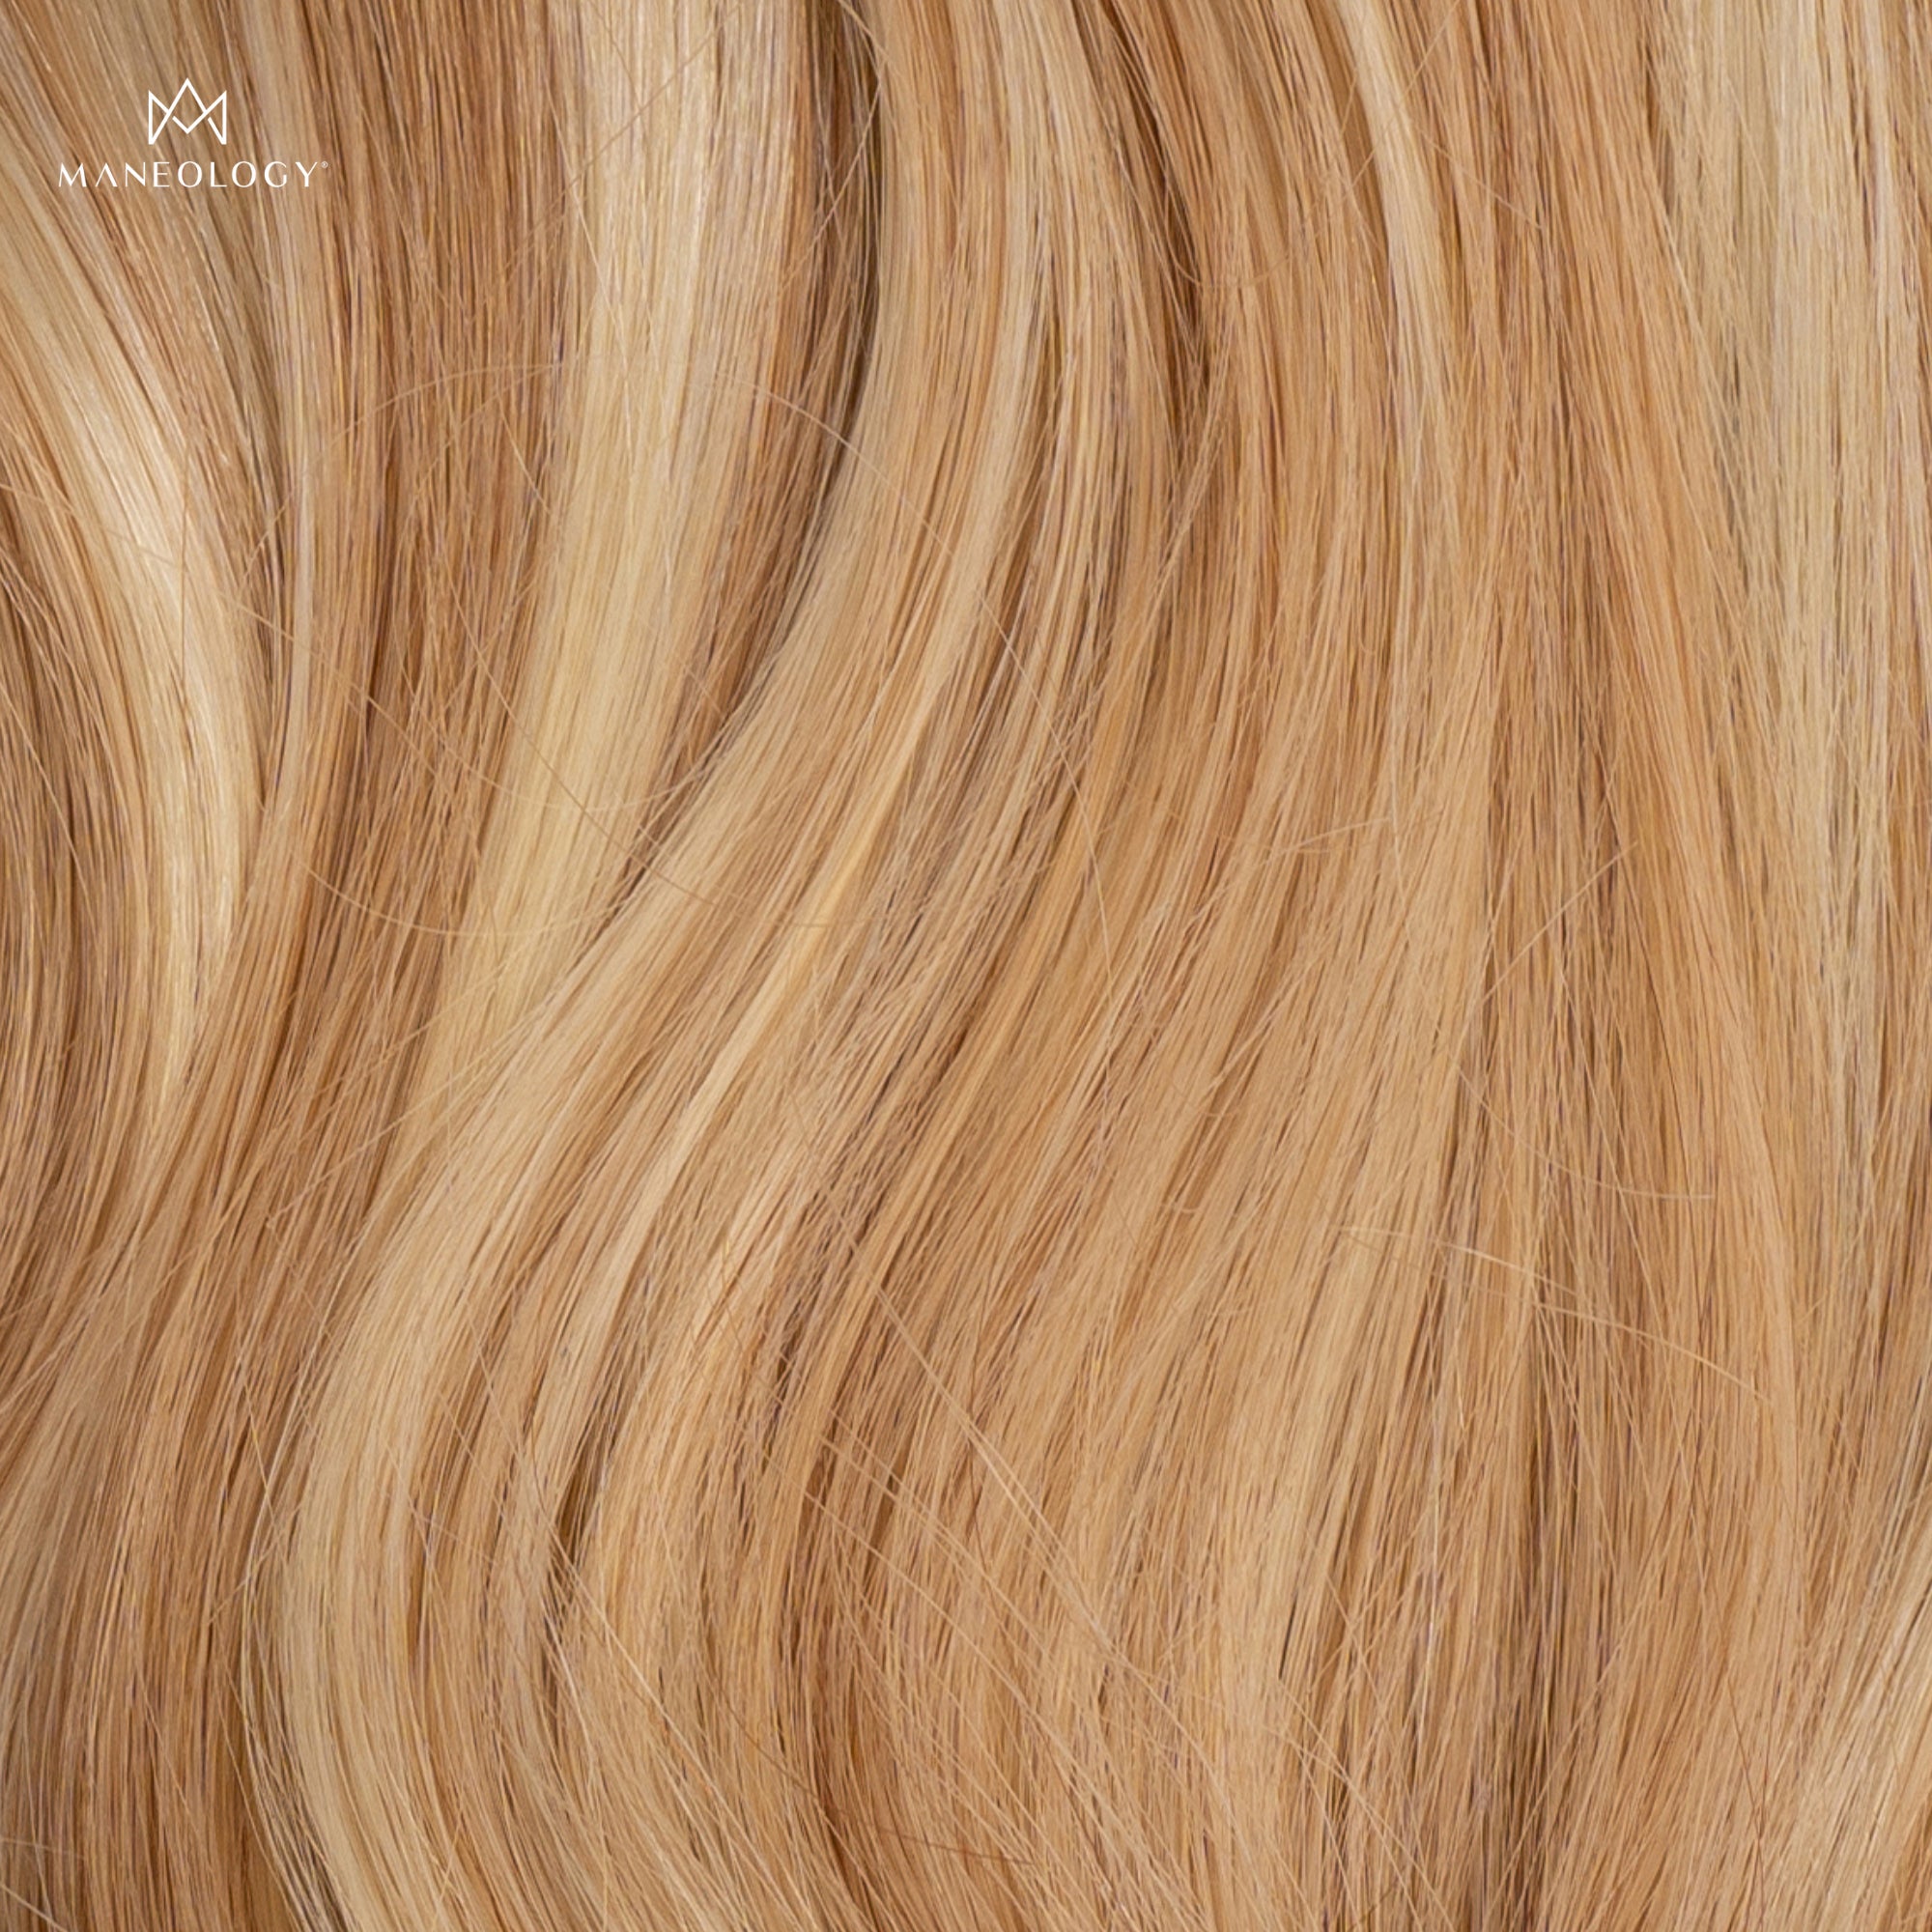 Duchess Elegant Clip-in Hair Extensions 14" Colour P27 613 - Maneology Hair Extensions